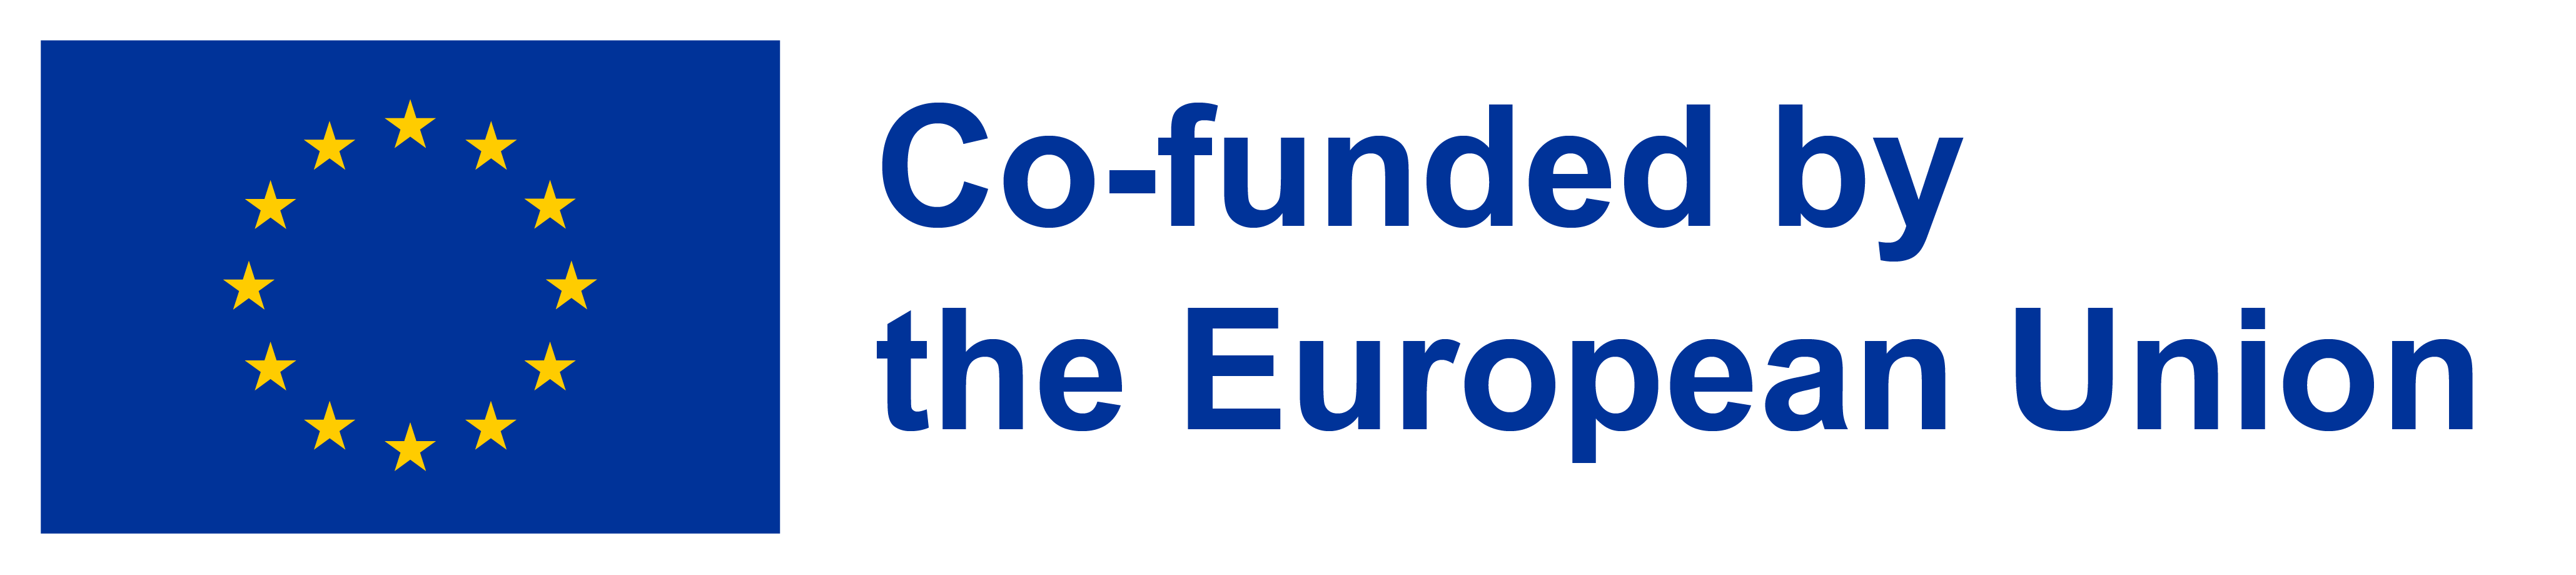 Co-founded by the European Union